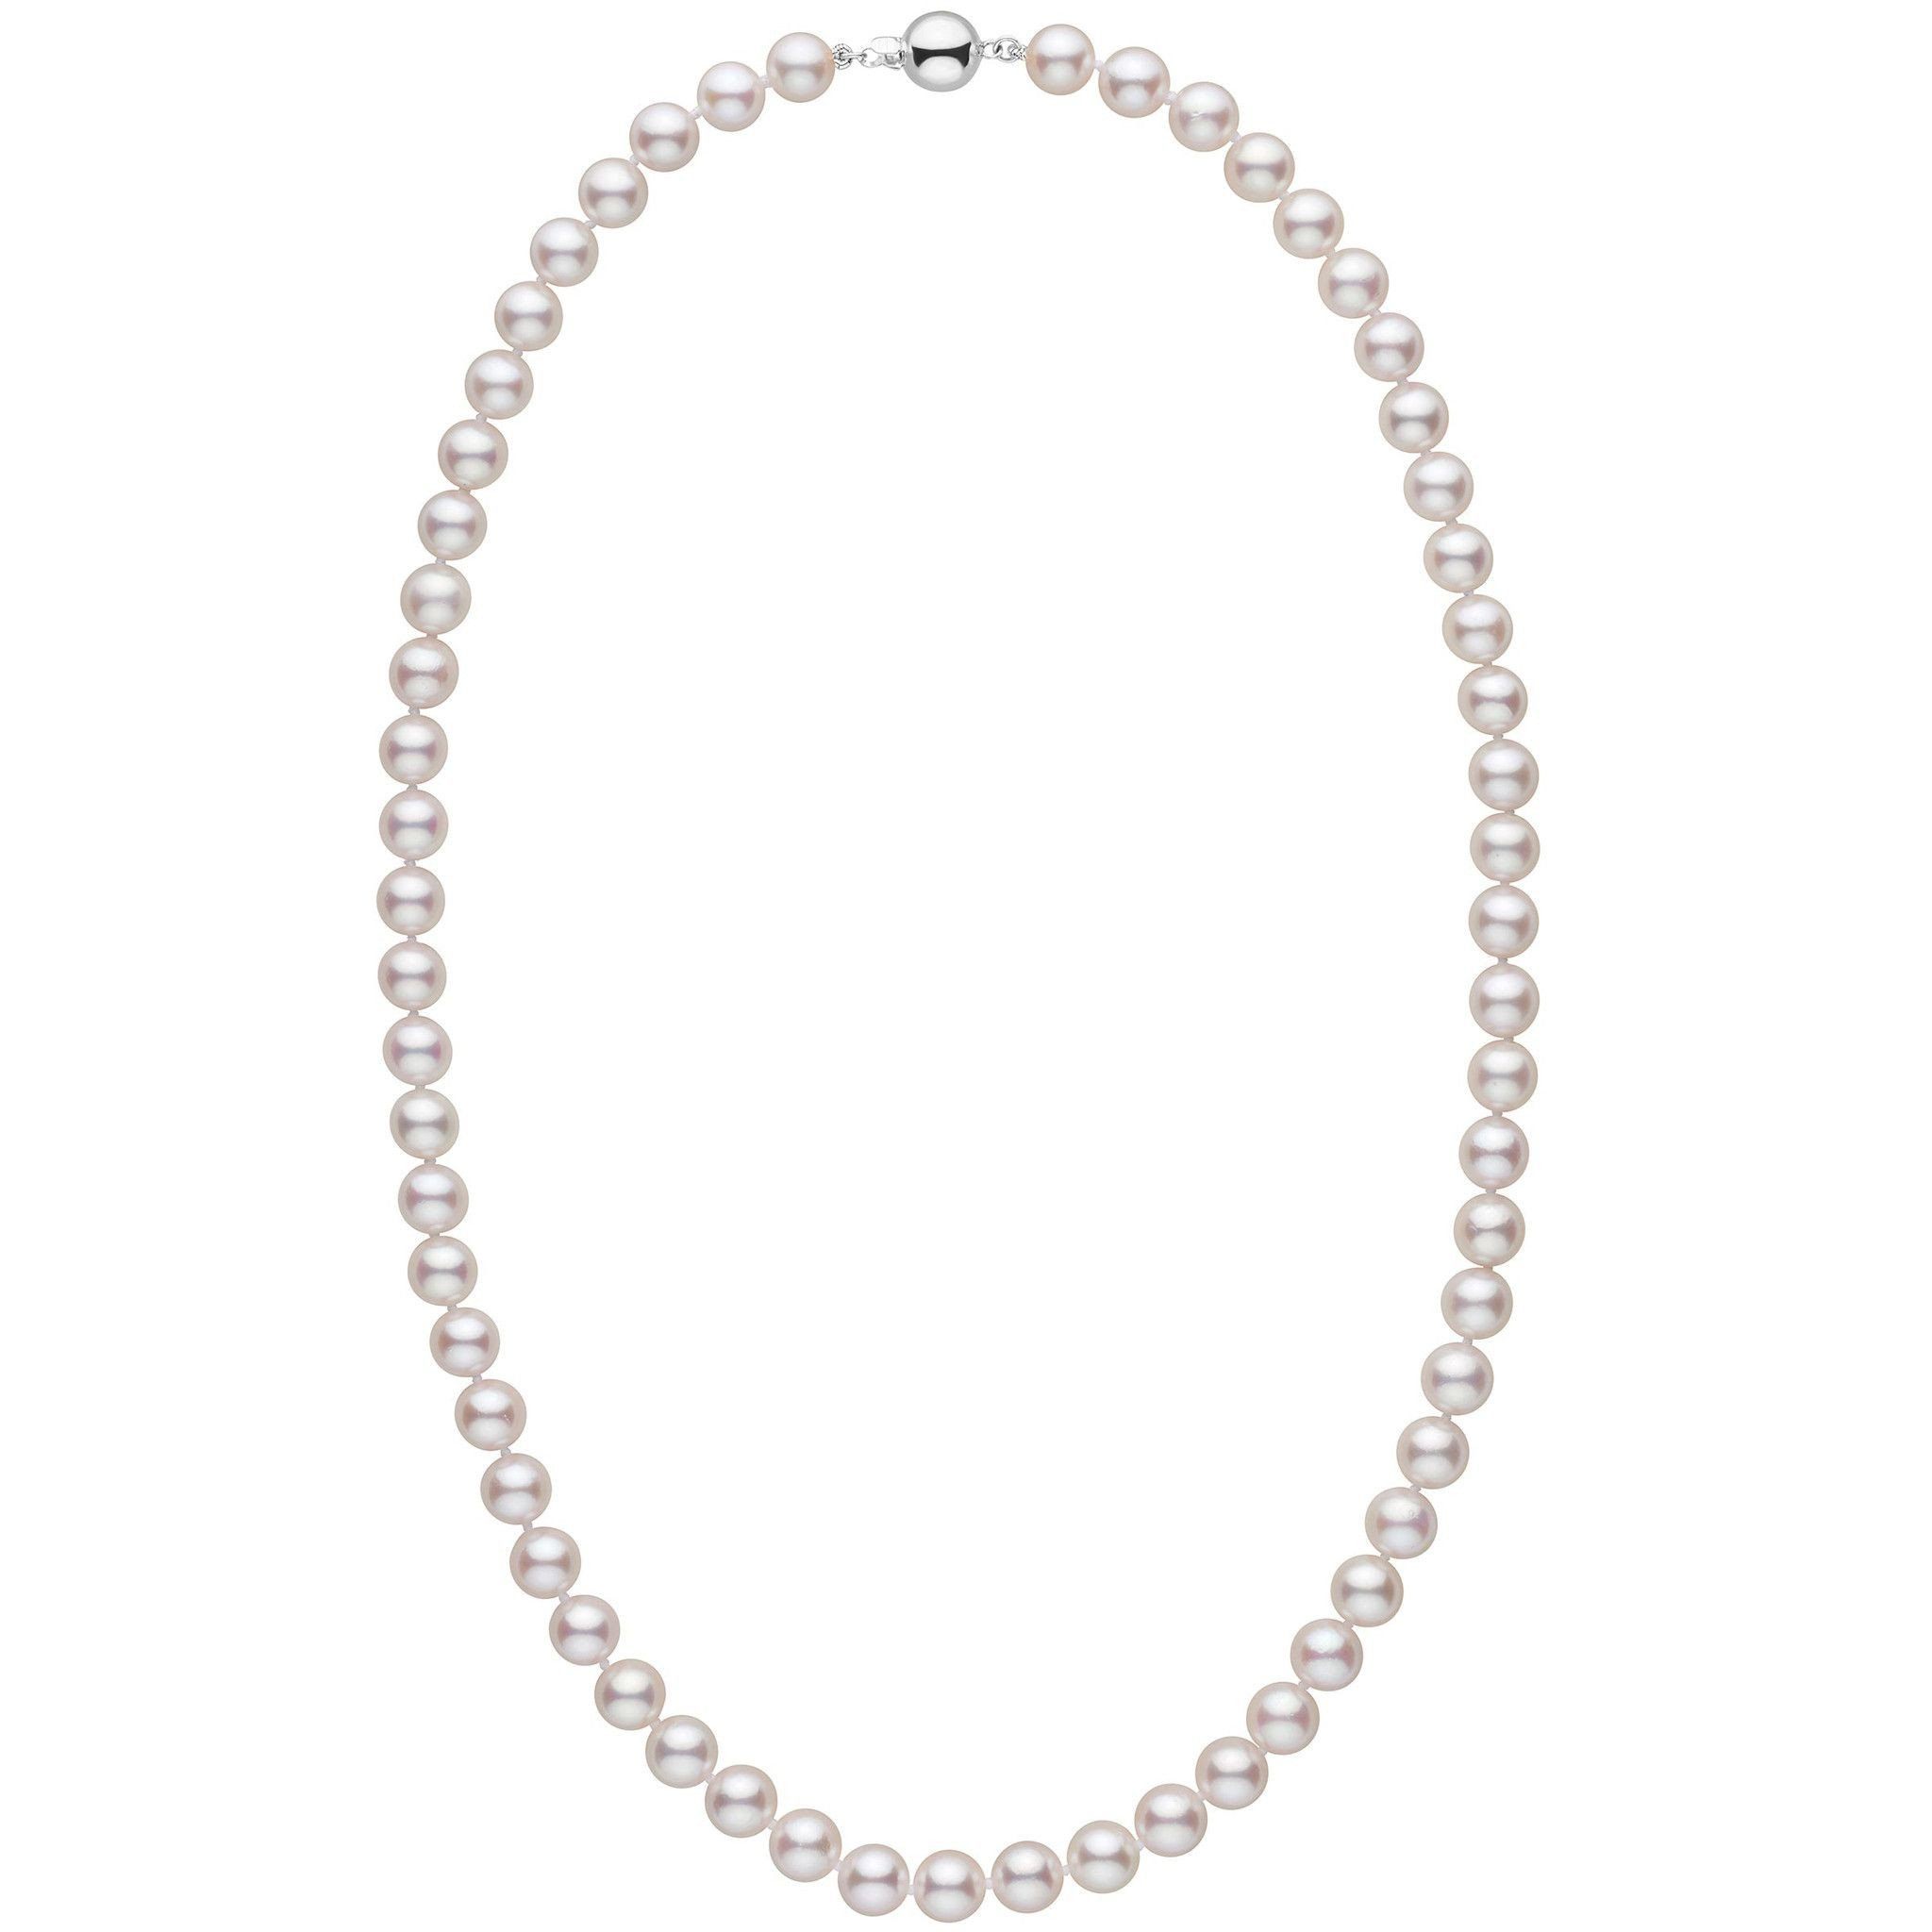 7.5-8.0 mm 22 inch AAA White Akoya Pearl Necklace white gold